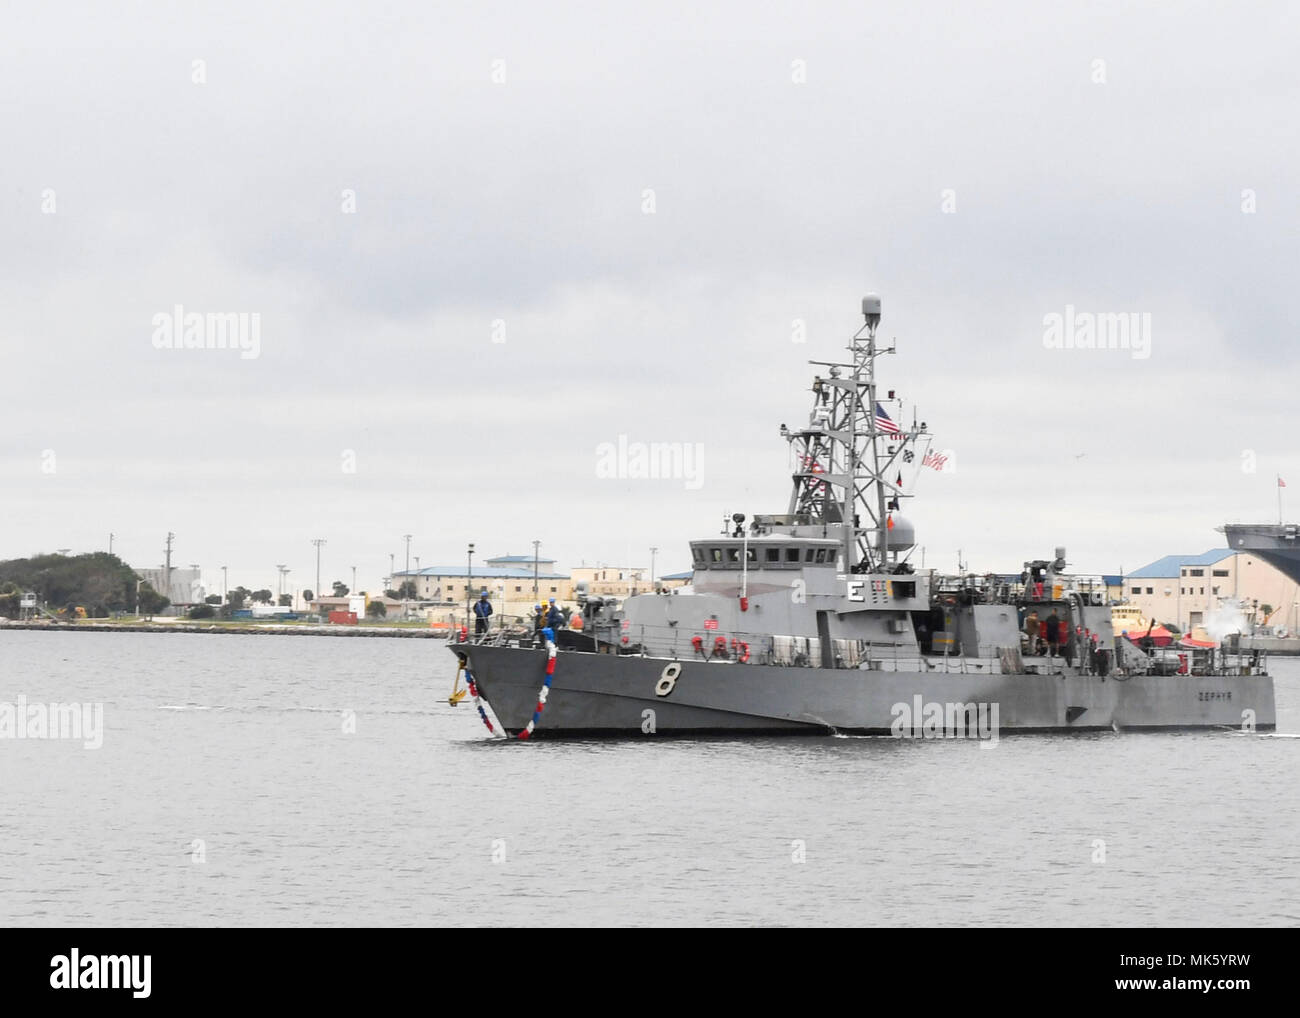 171110-N-NY430-011 JACKSONVILLE, Fla. (Nov. 10, 2017) Cyclone-class coastal patrol ship USS Zephyr (PC 8) returns to Naval Station Mayport following a 76-day patrol in support of U.S. 4th Fleet area of operations. Working with partner nations participating in Operation Martillo, a partnership to target illicit drug trafficking routes in the waters off Central America, Zephyr seized 726 kilograms of cocaine valued at approximately $17-26 million in street value. (U.S. Navy photo by Mass Communication Specialist 3rd Class Kristopher S. Haley/ Released) Stock Photo